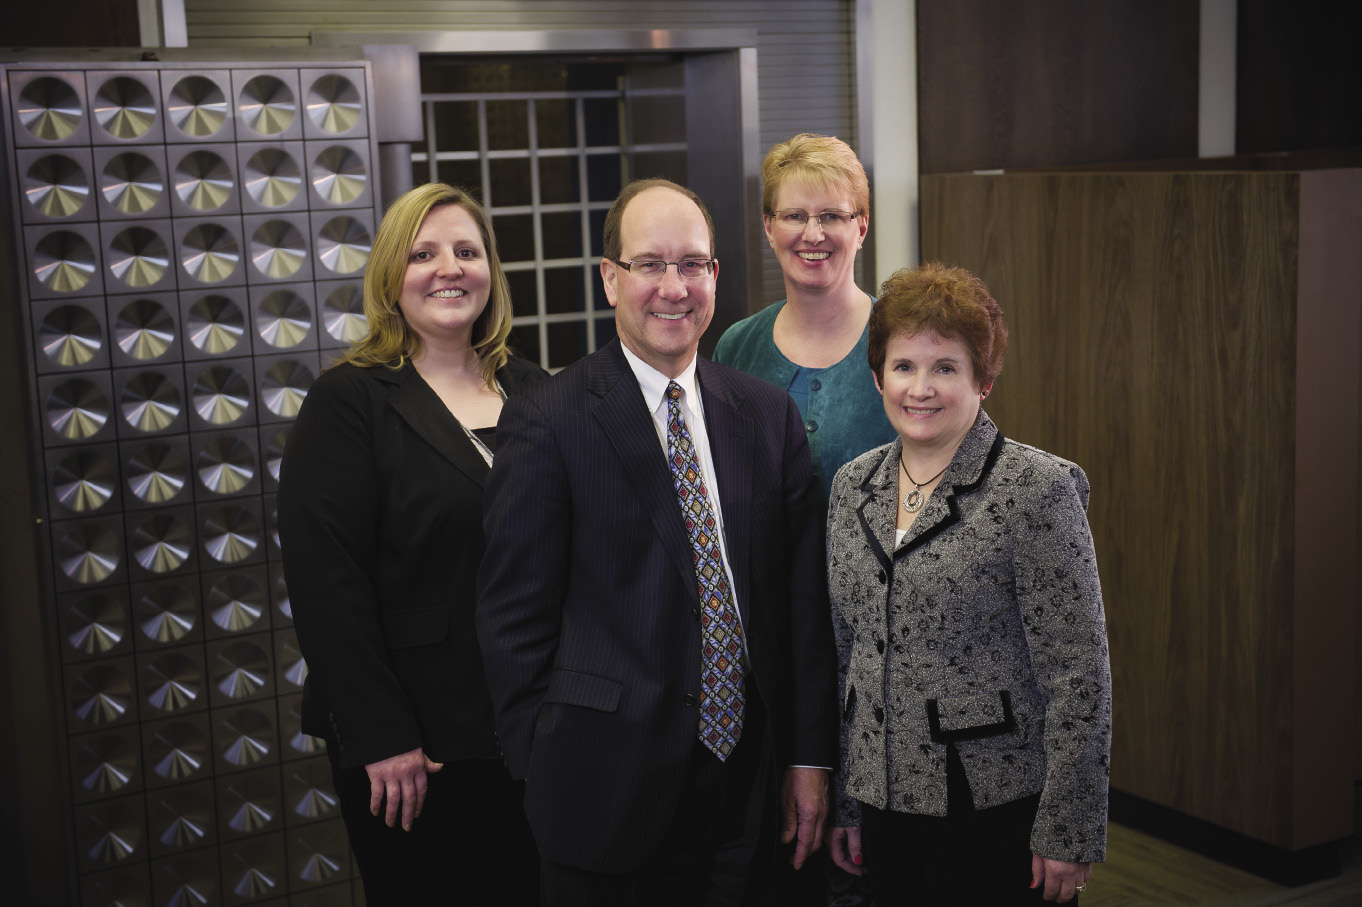 Associated Bank staff in MarshḀeld includes (from left) Theresa Zirbel O’Neel, senior bank manager; John Baur, community bank president; Peggy Davis, corporate loan review officer; and Nancy Kautza, commercial loan sales and service support specialist.